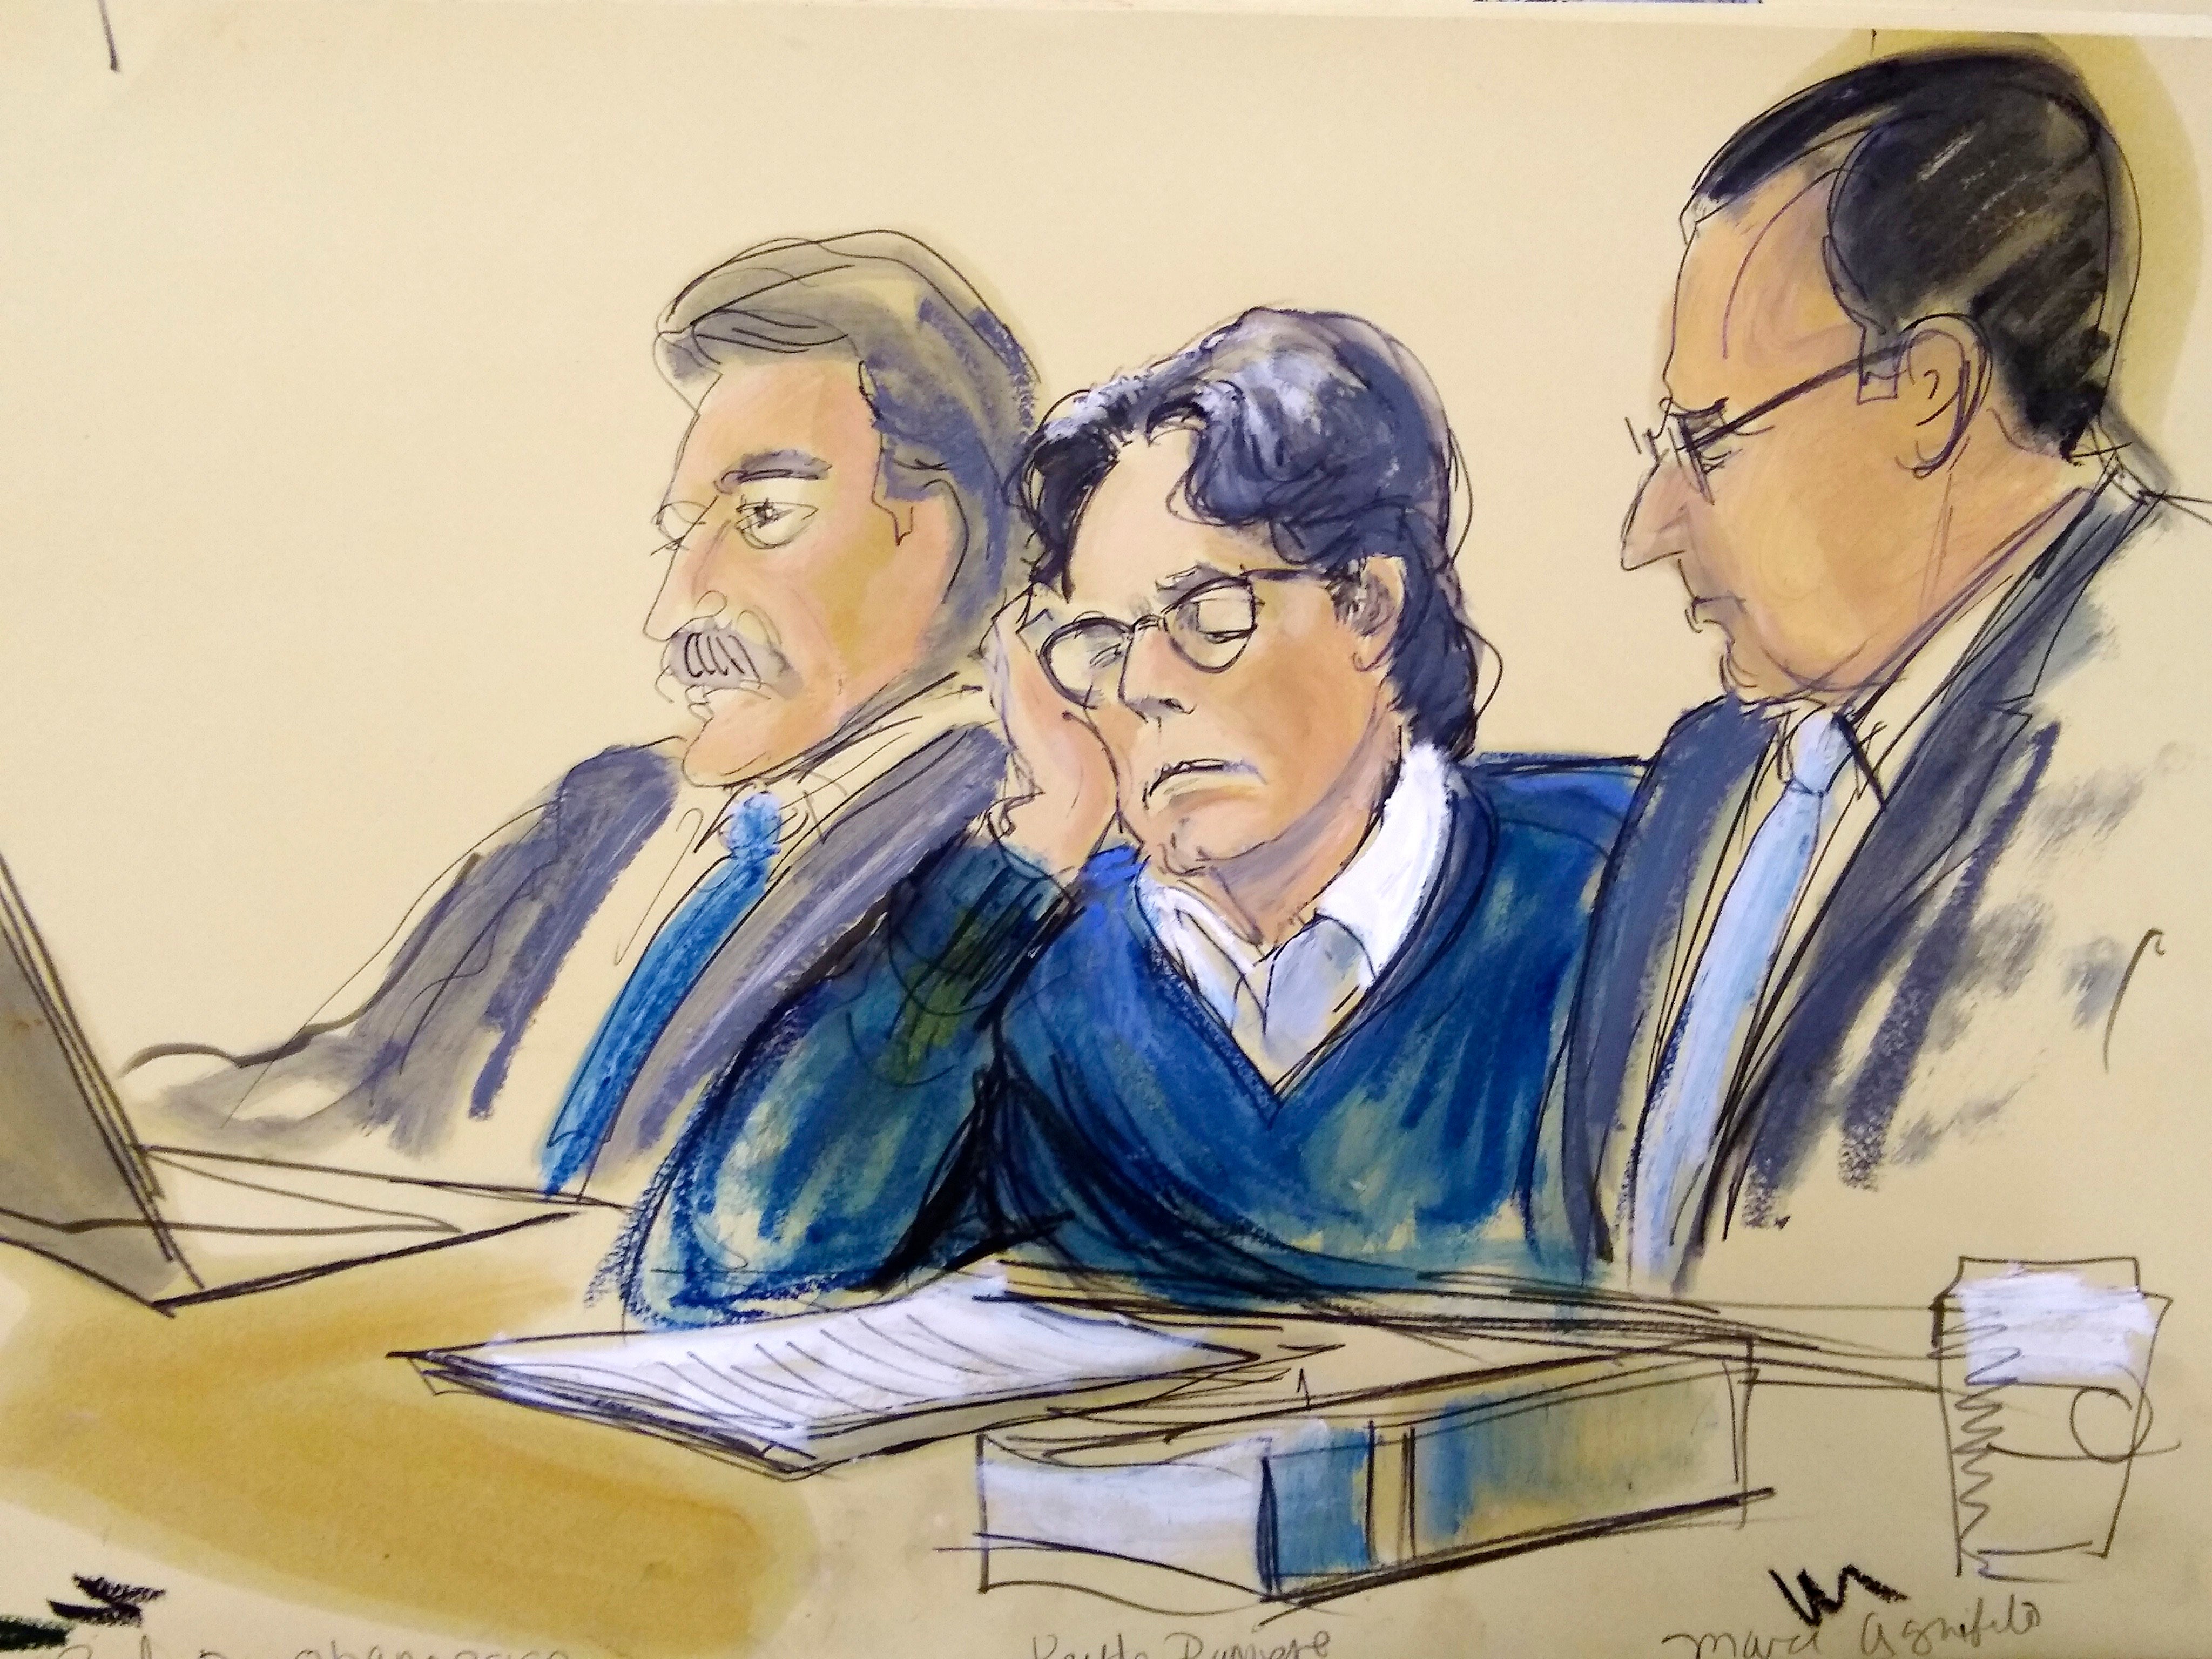 Keith Raniere (centre) in a court sketch dated 18 June 2019, made during closing arguments in Brooklyn federal court